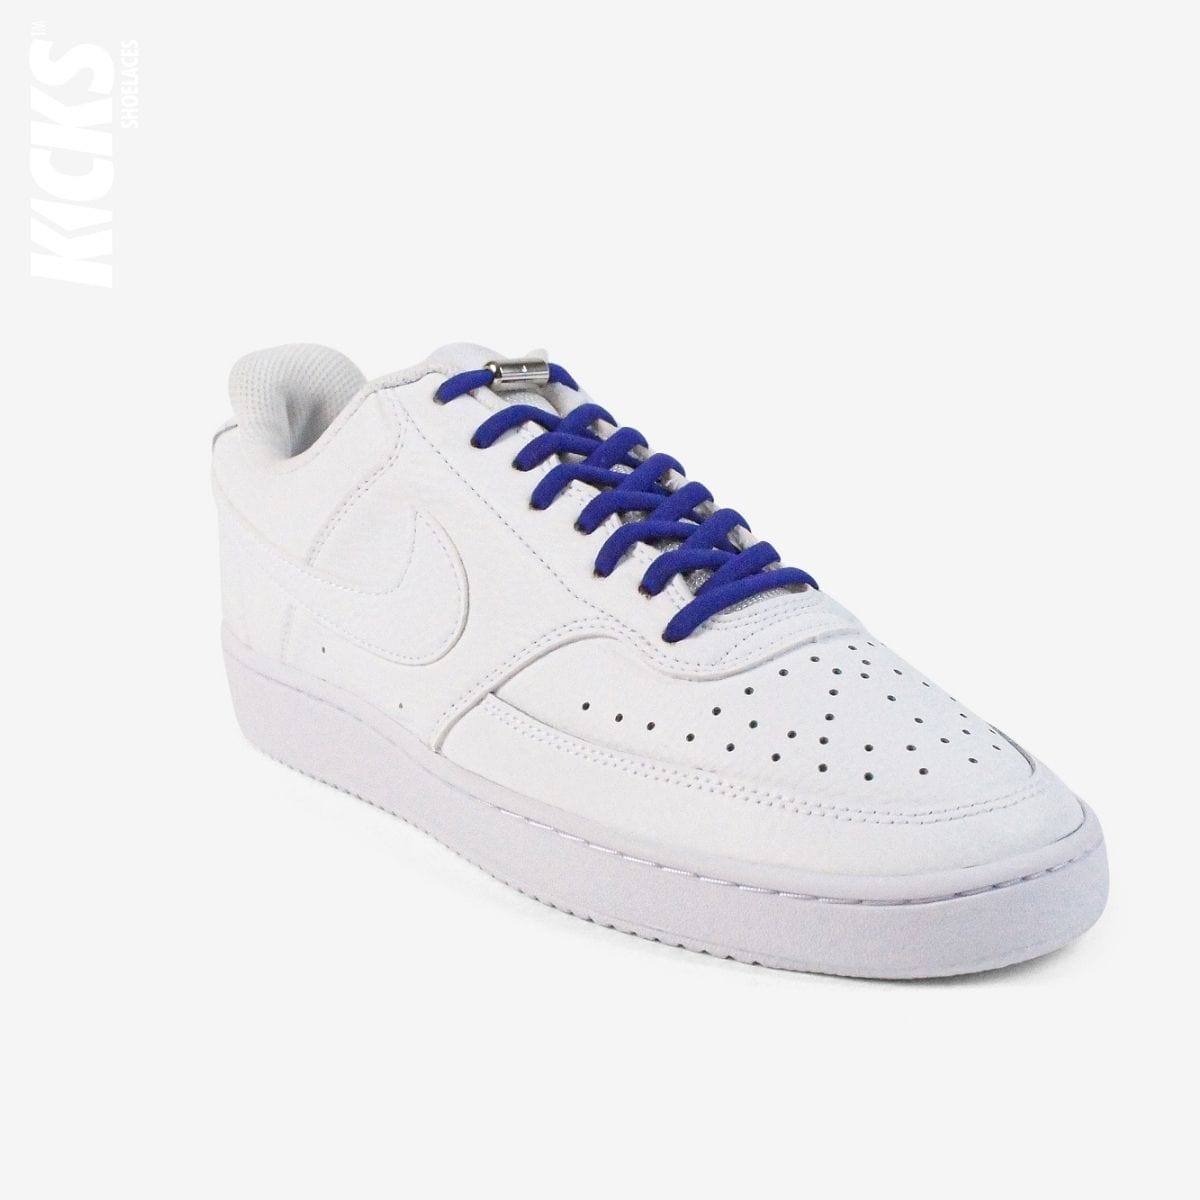 round-no-tie-laces-with-royal-blue-shoelaces-on-white-shoes-by-kicks-shoelaces